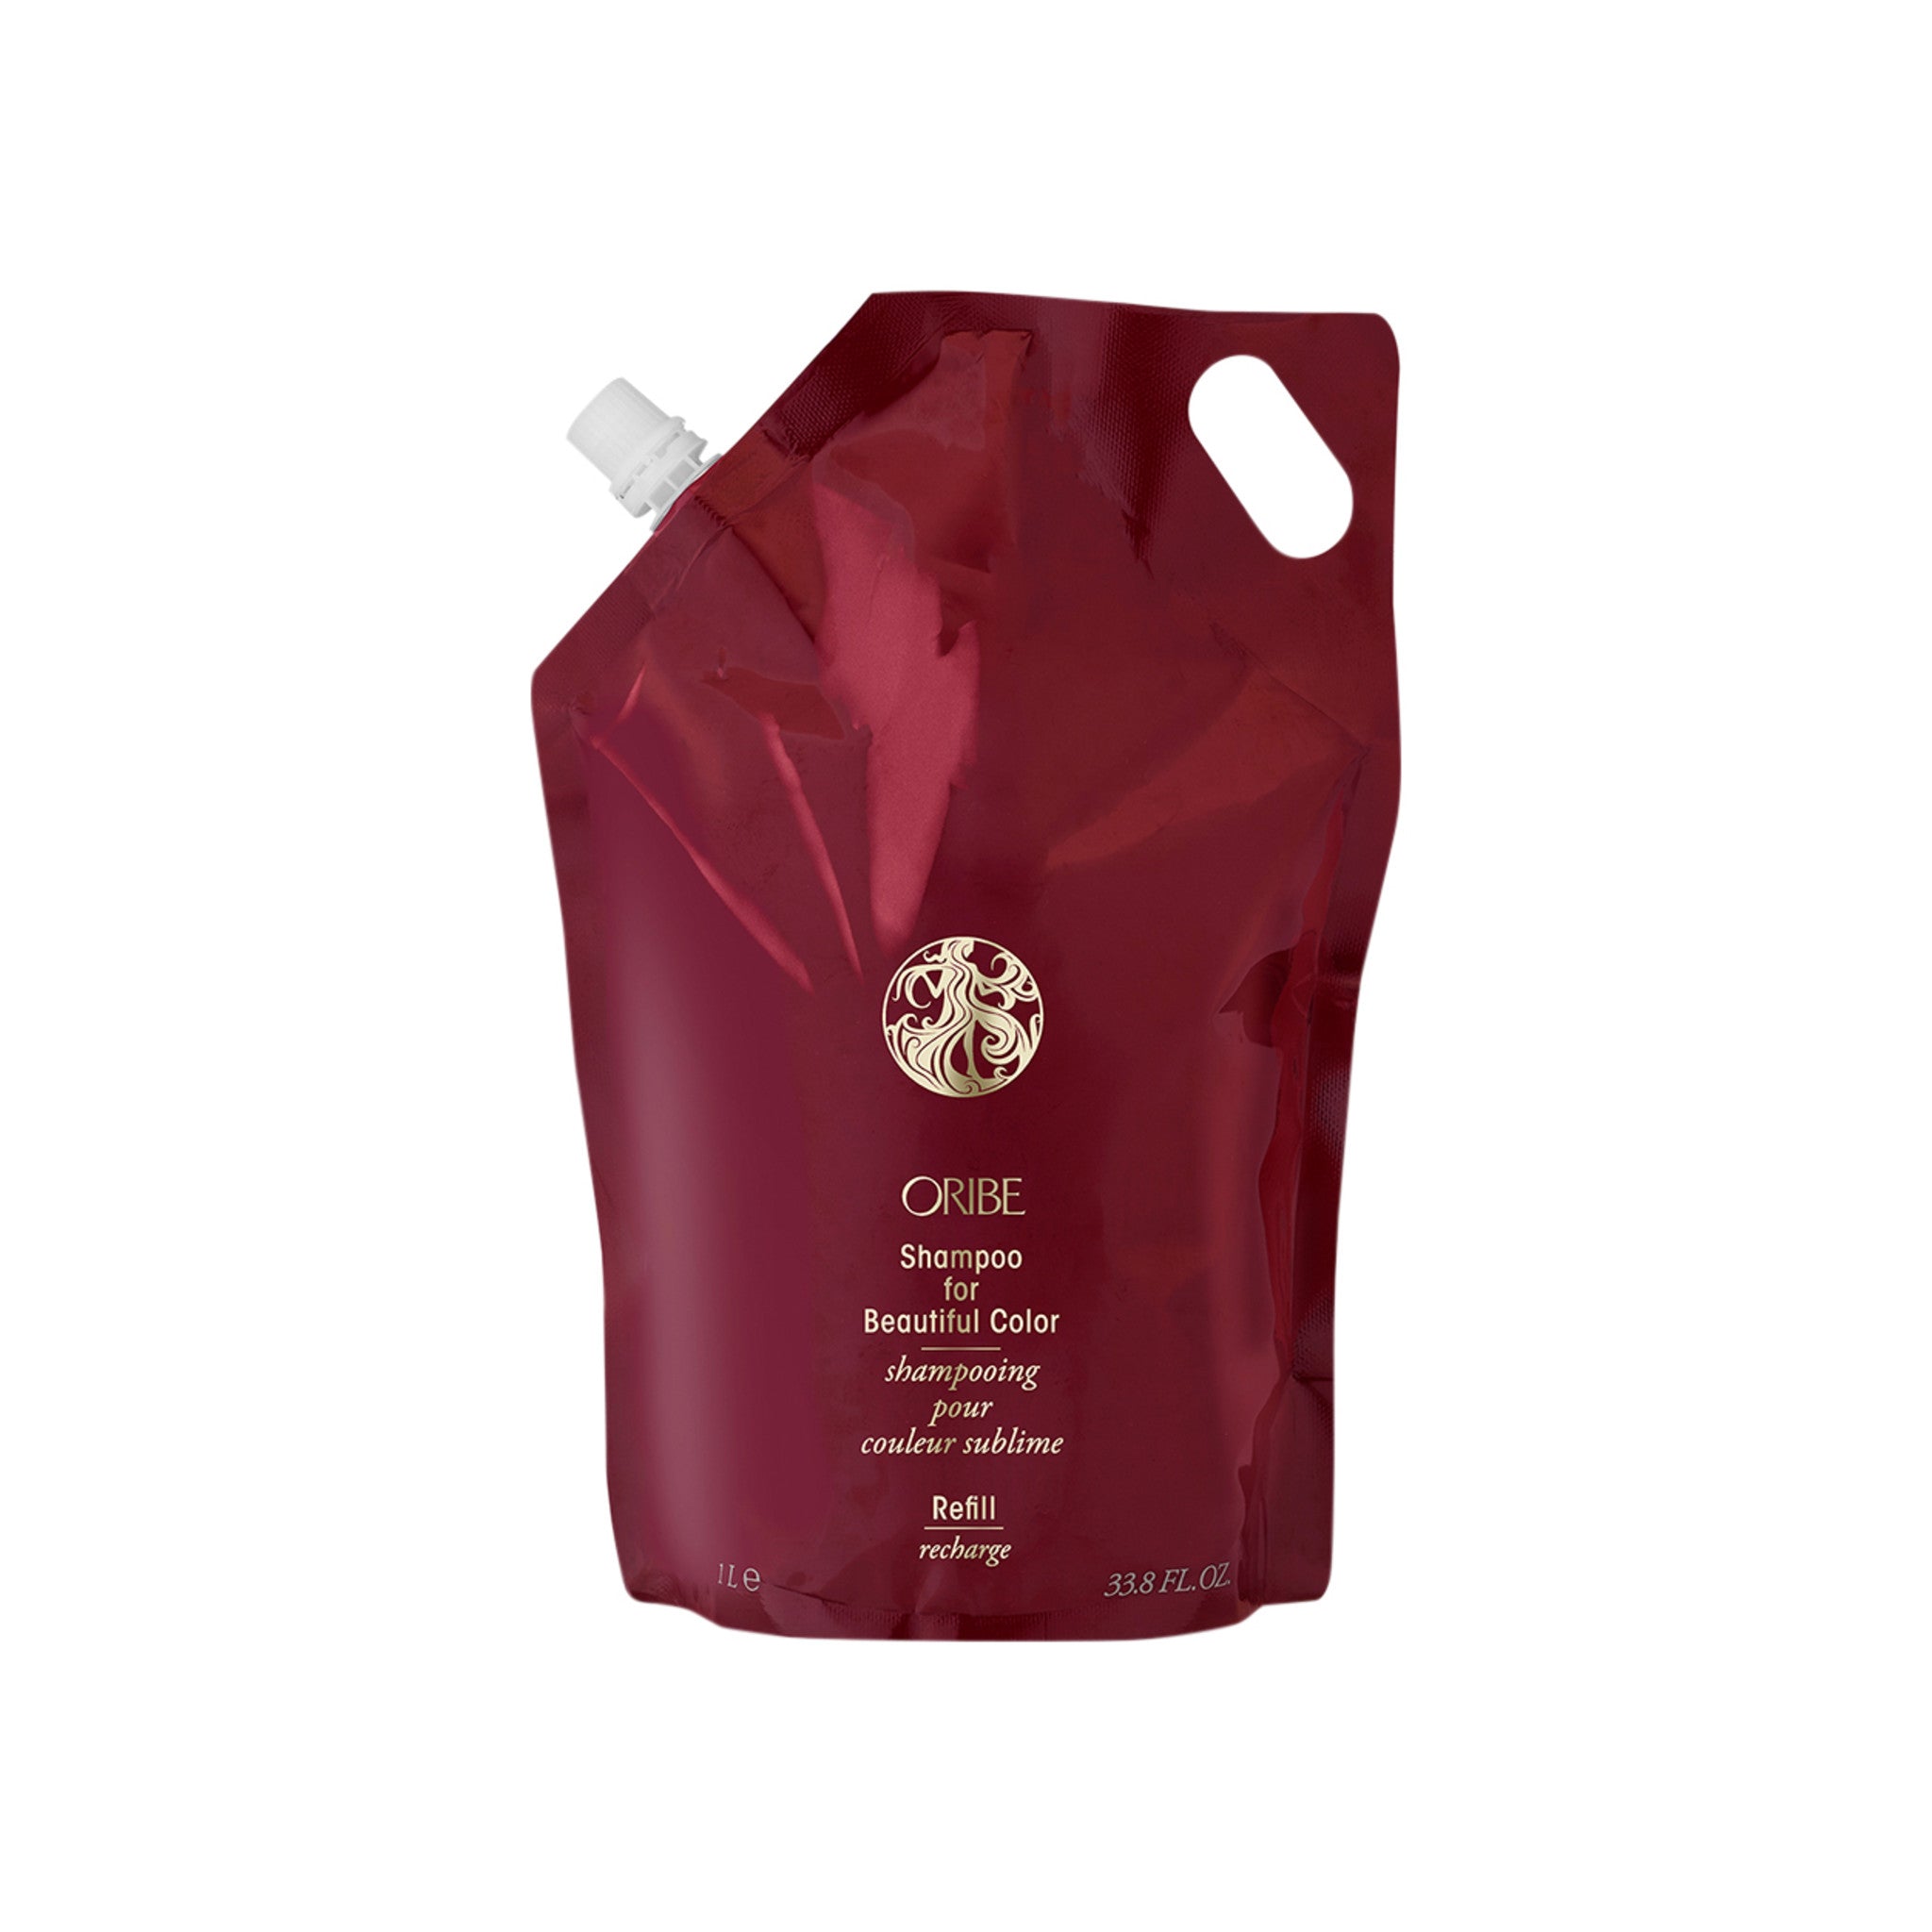 Oribe Shampoo for Beautiful Color Refill Pouch main image.